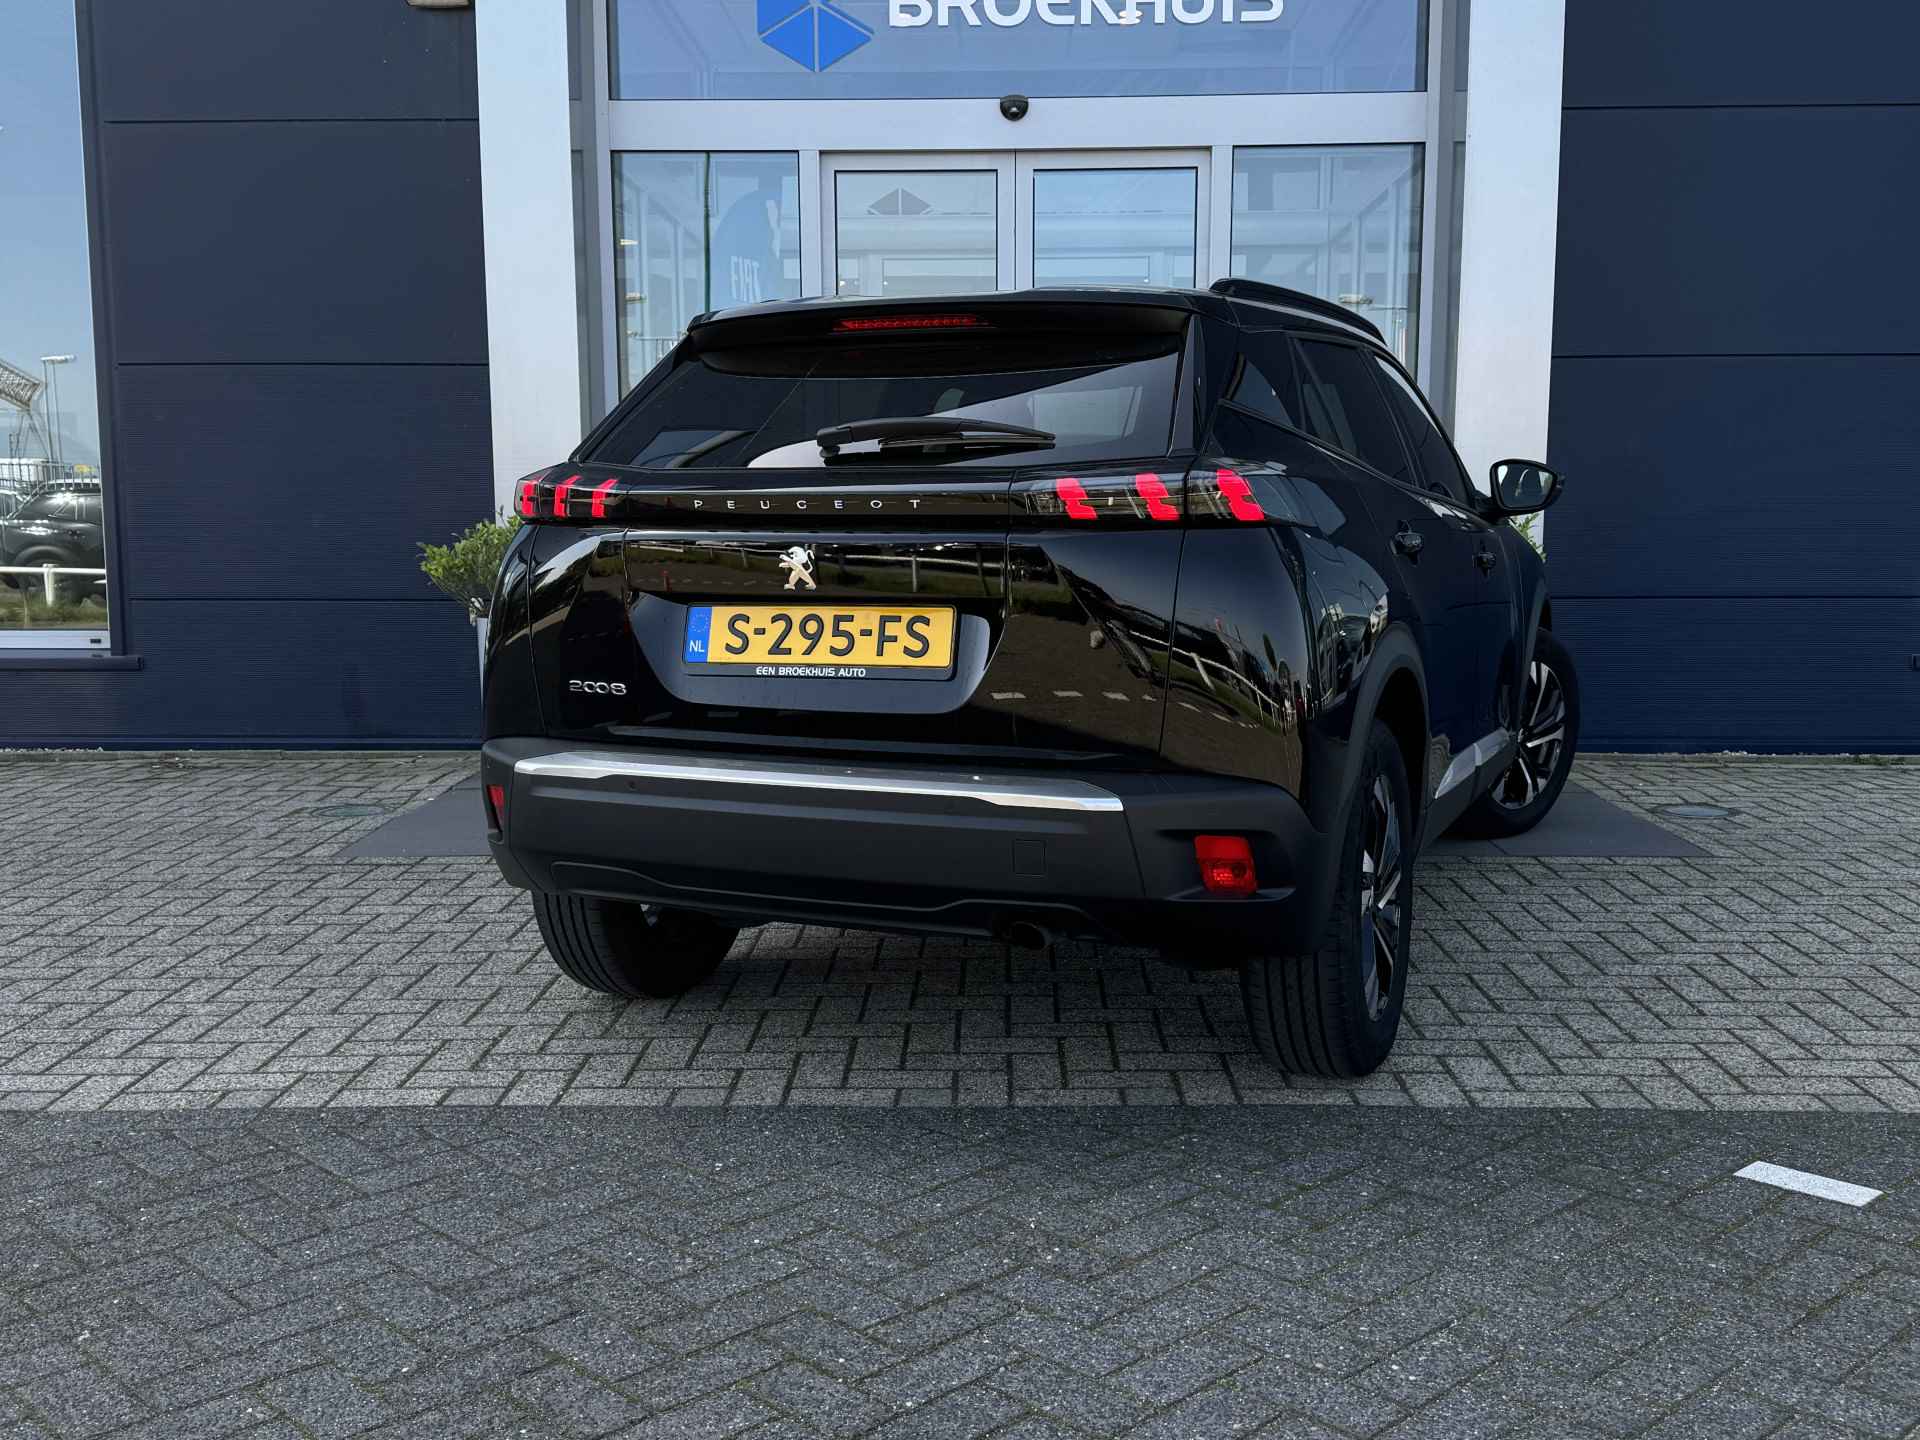 Peugeot 2008 1.2 100PK Allure | PDC achter | Climate Control | Cruise Control | Carplay - 9/29